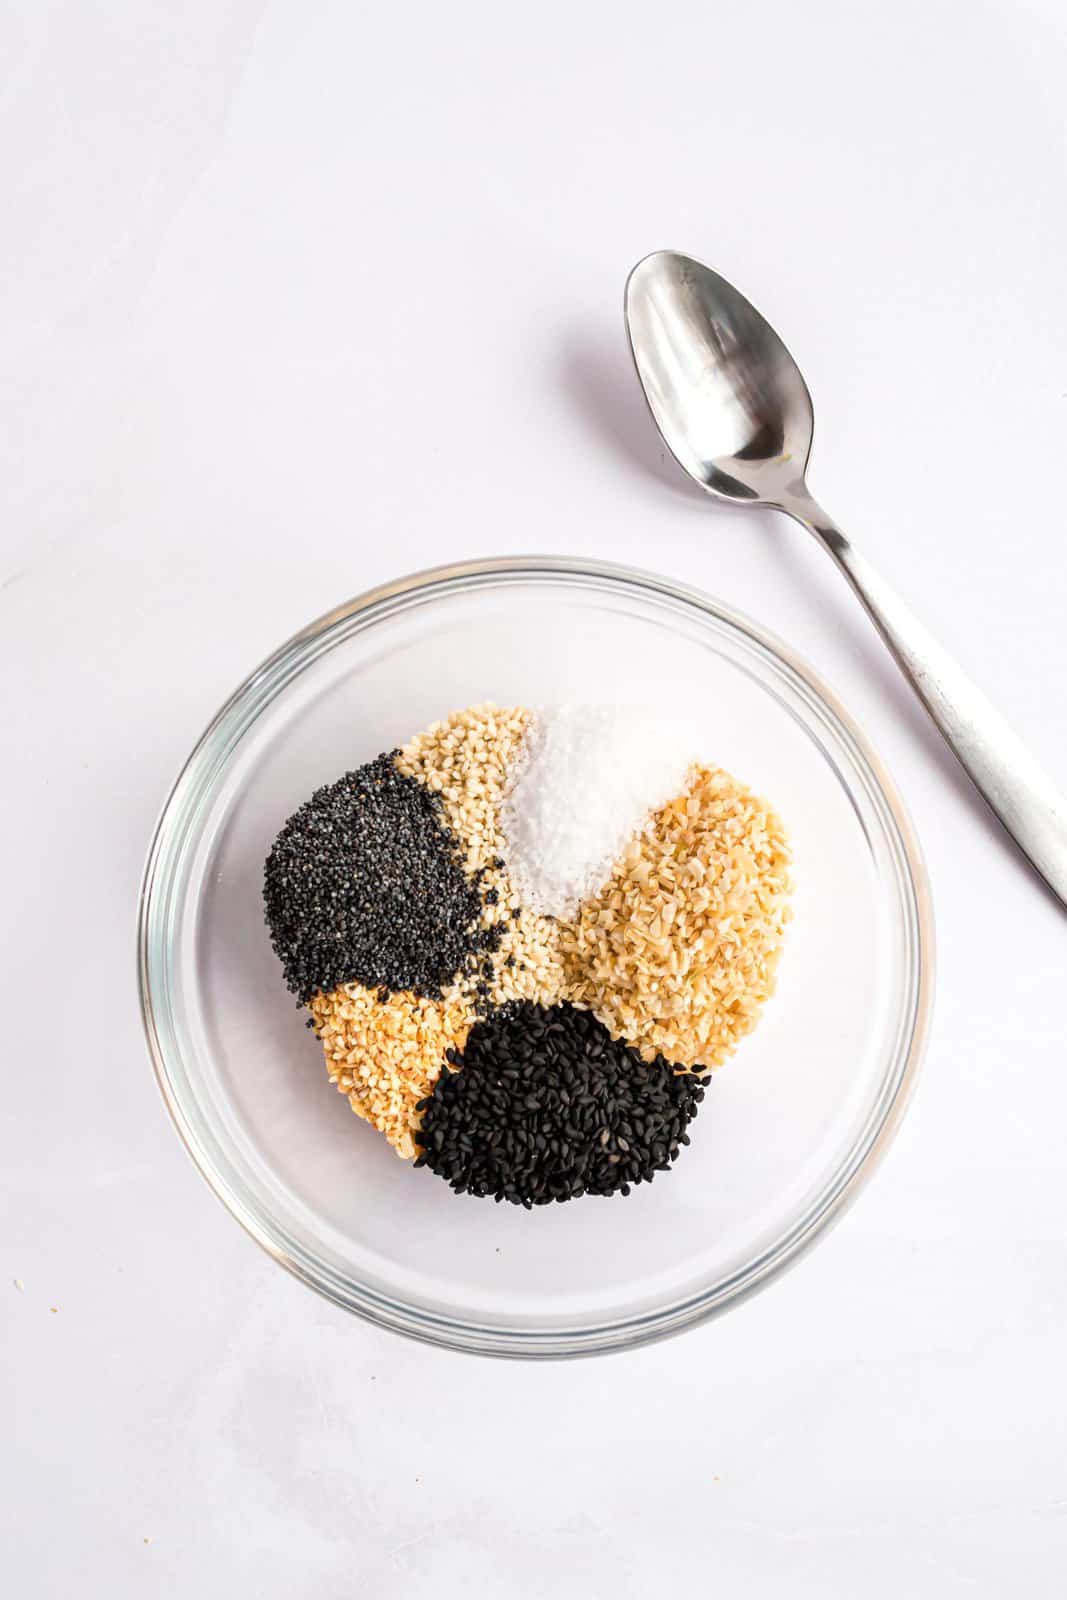 Poppy seeds, white sesame seeds, black sesame seeds, dried minced onion, dried minced garlic, and salt in a mixing bowl.